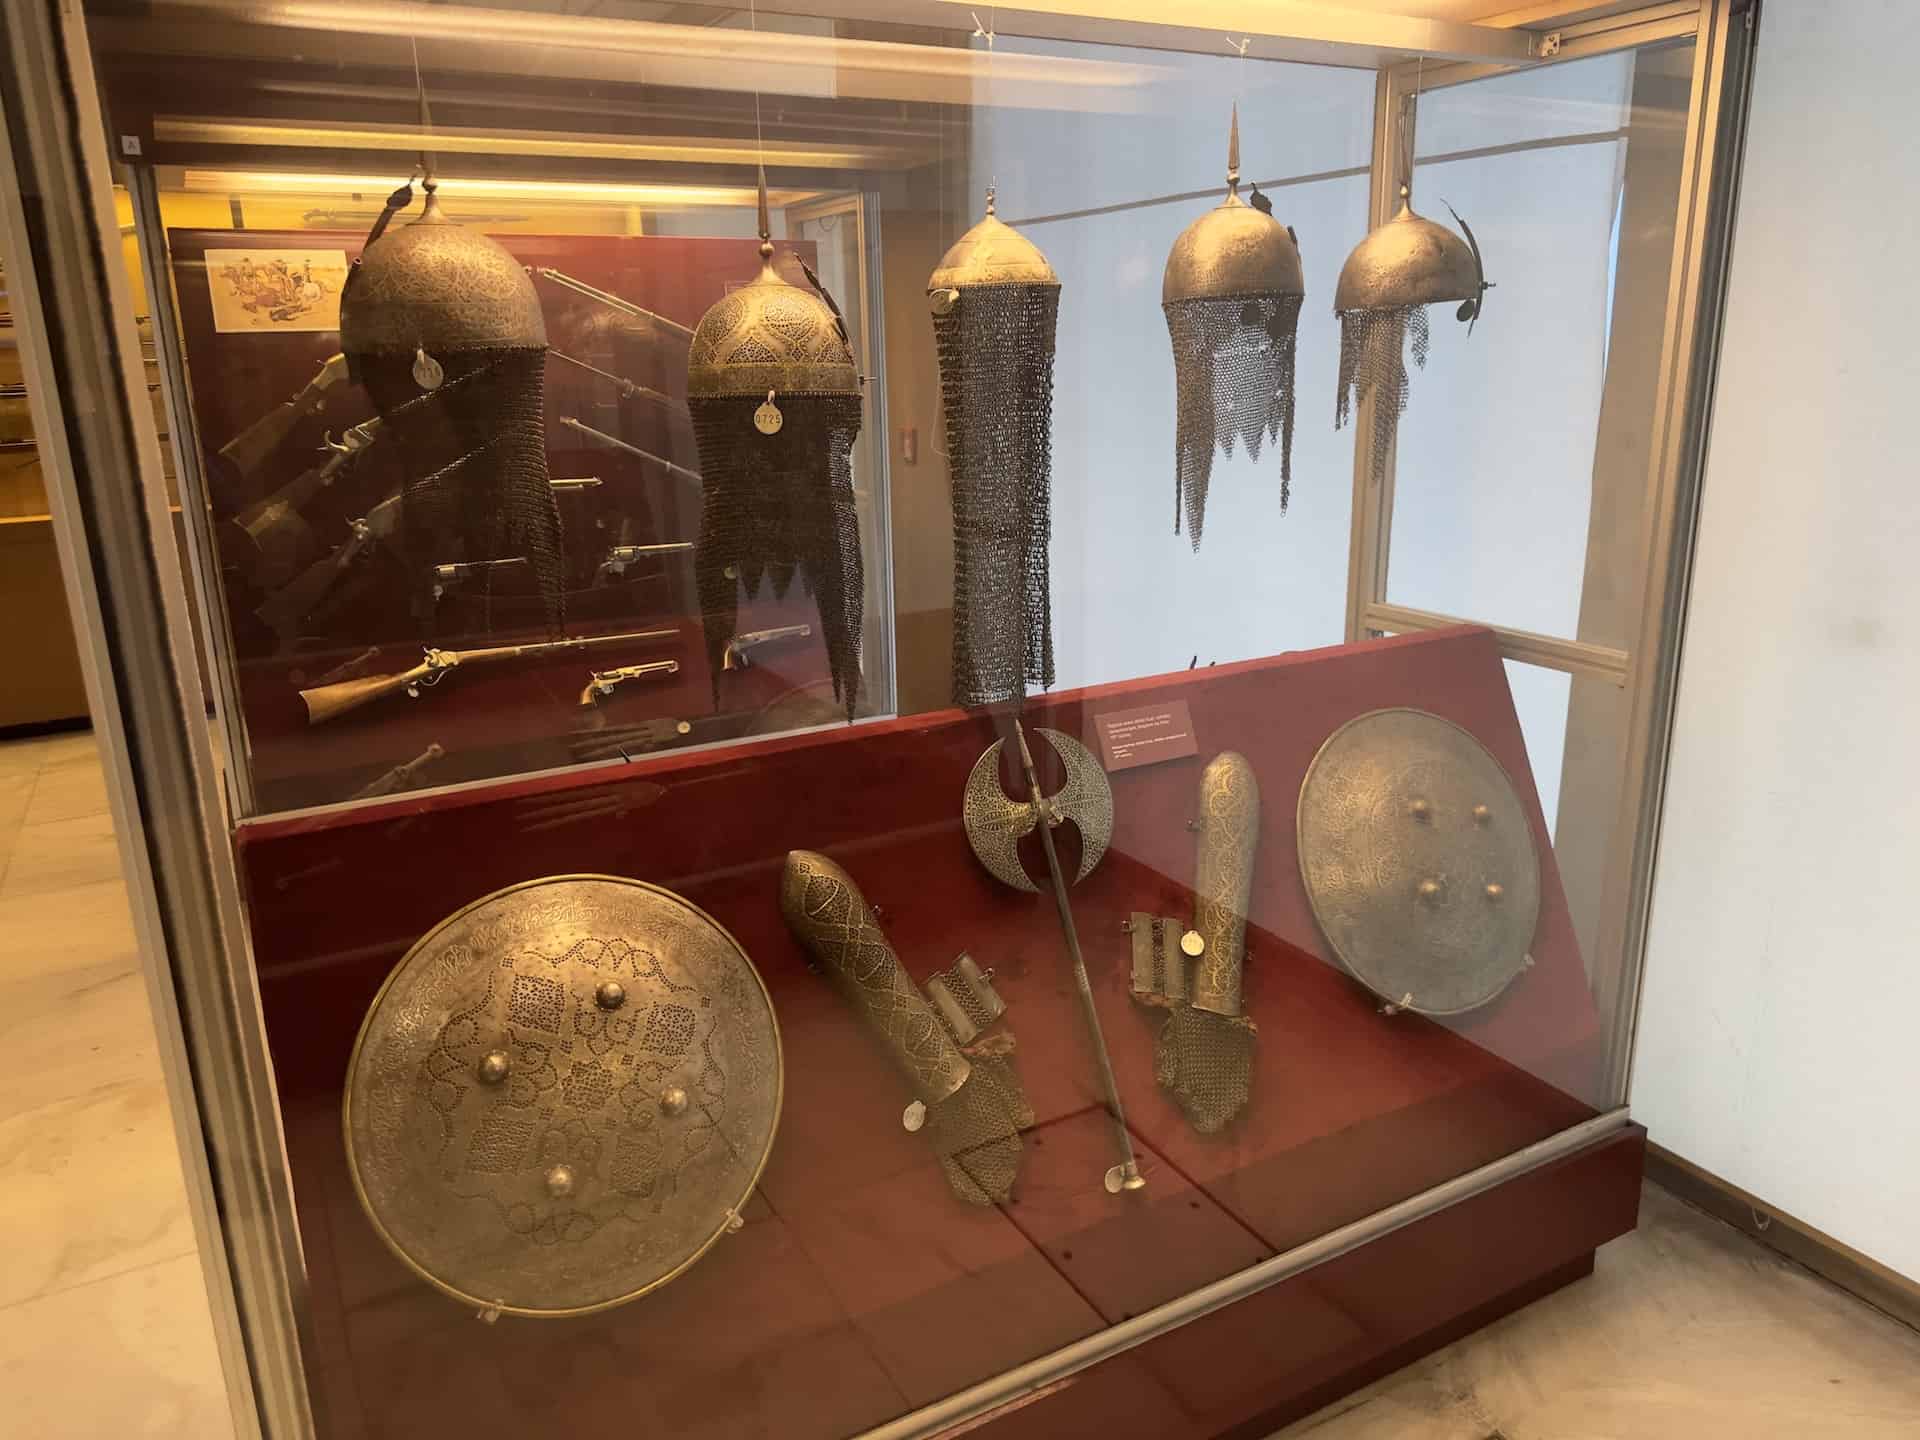 Persian helmets, shields, armguards, and weapons; 19th century in the weapons gallery at the War Museum in Athens, Greece